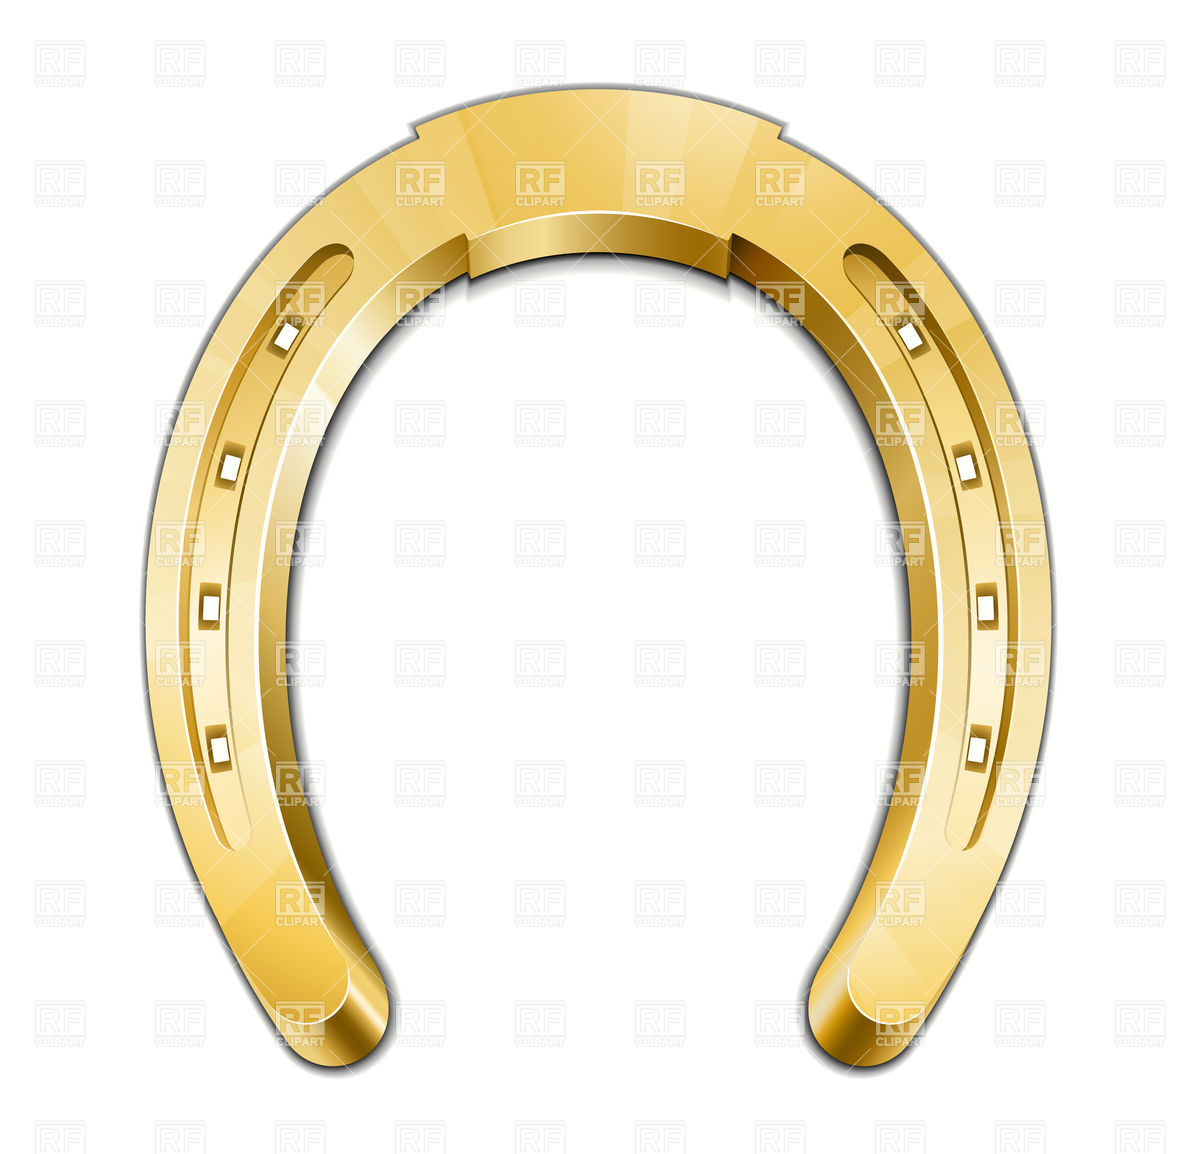 Horseshoe   Good Luck Symbol Download Royalty Free Vector Clipart